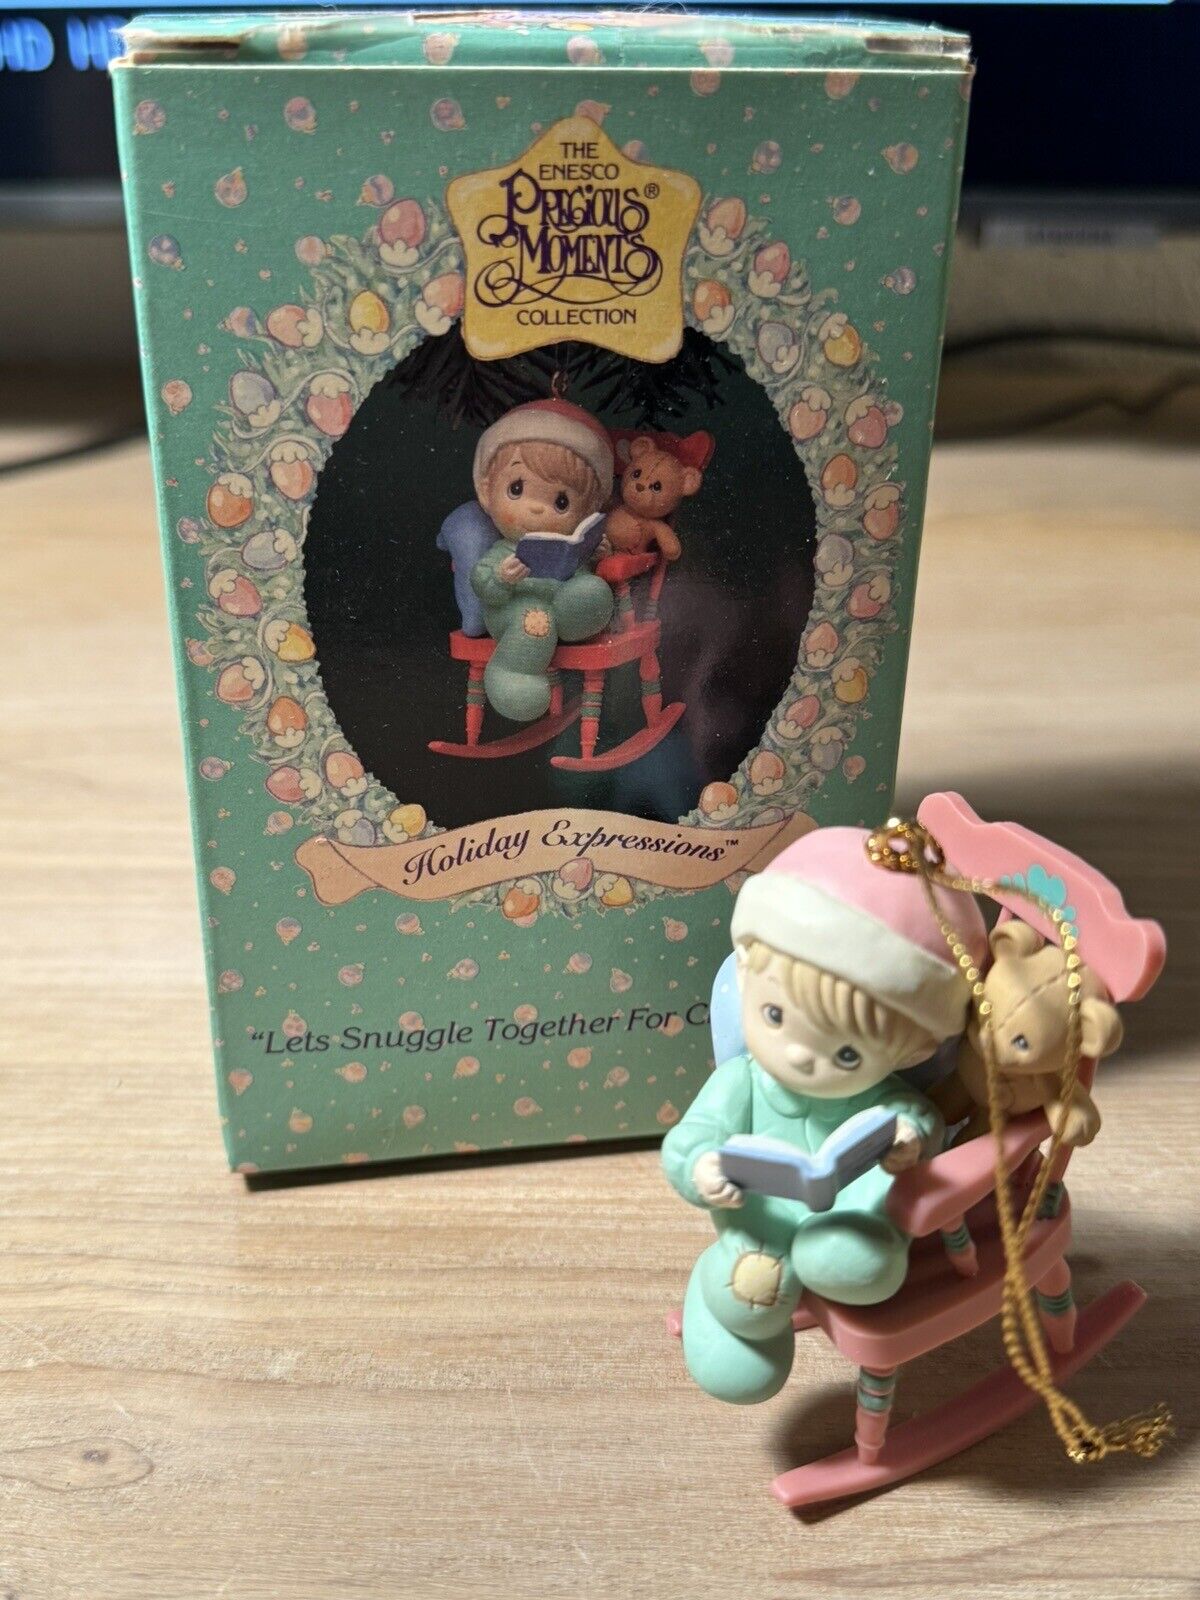 1995 Vintage Precious Moments Ornament - Lets Snuggle Together For Christmas